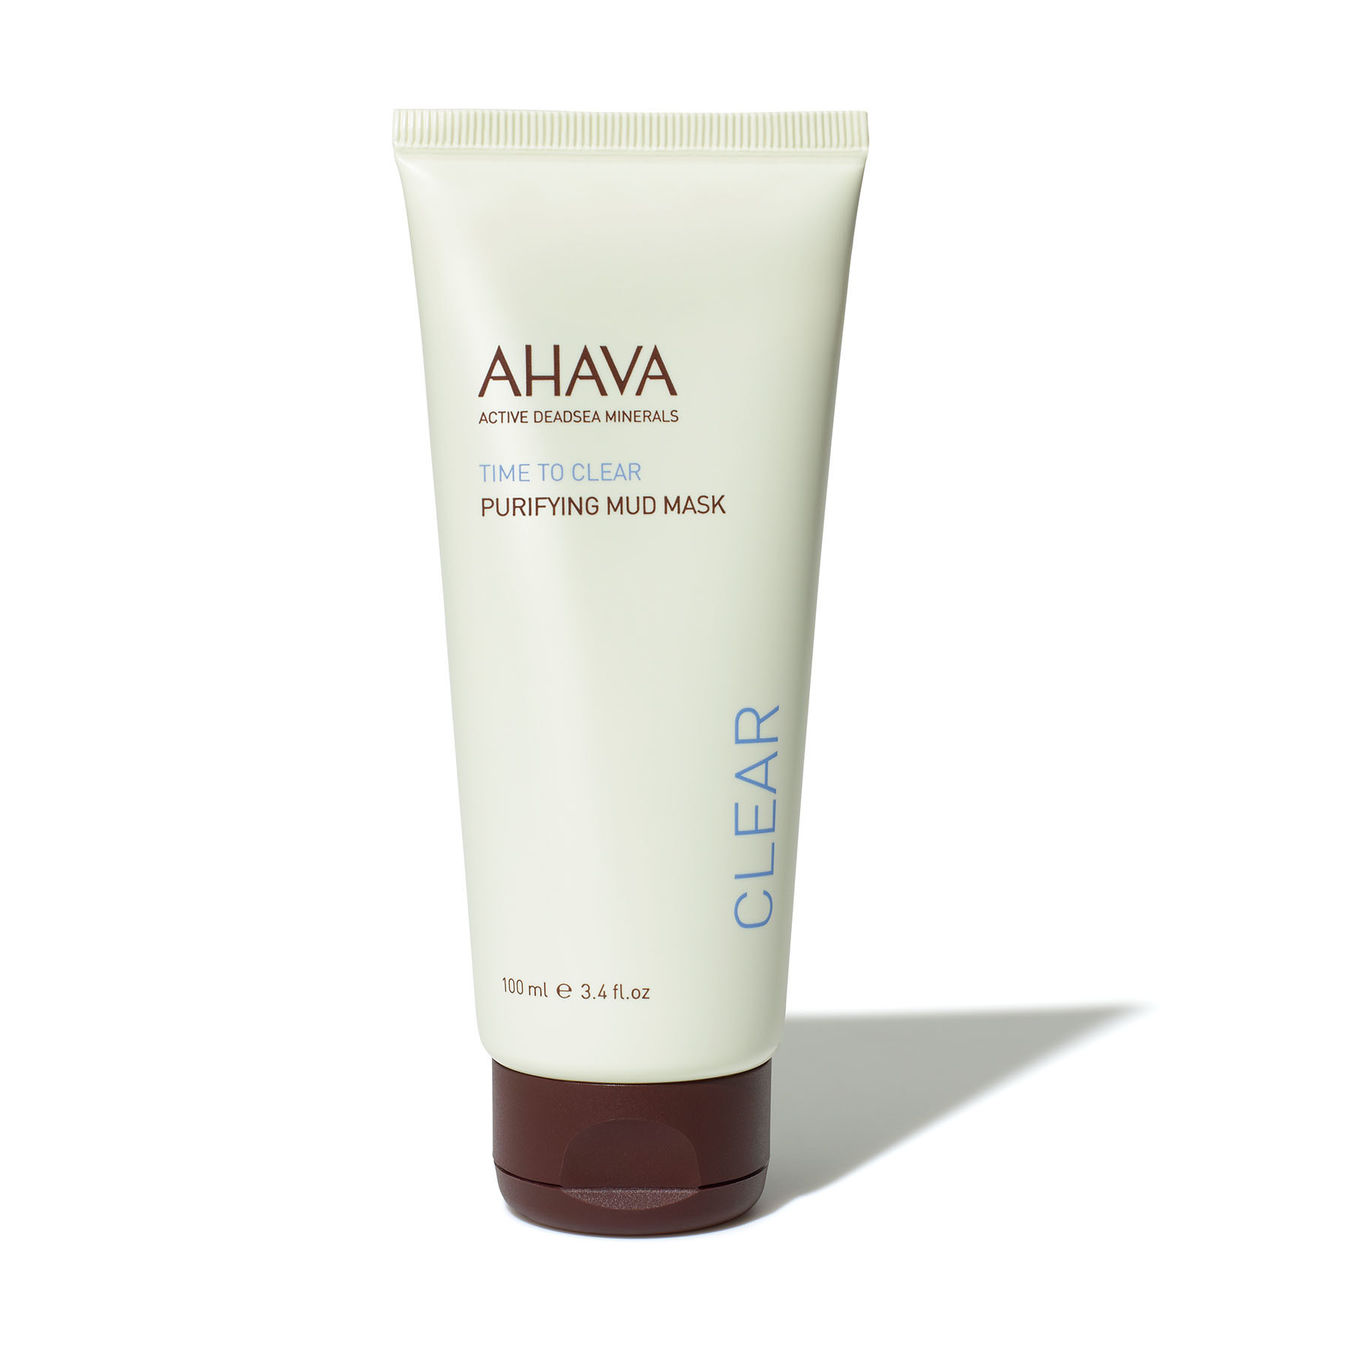 AHAVA Time to Clear Purifying Mud Mask